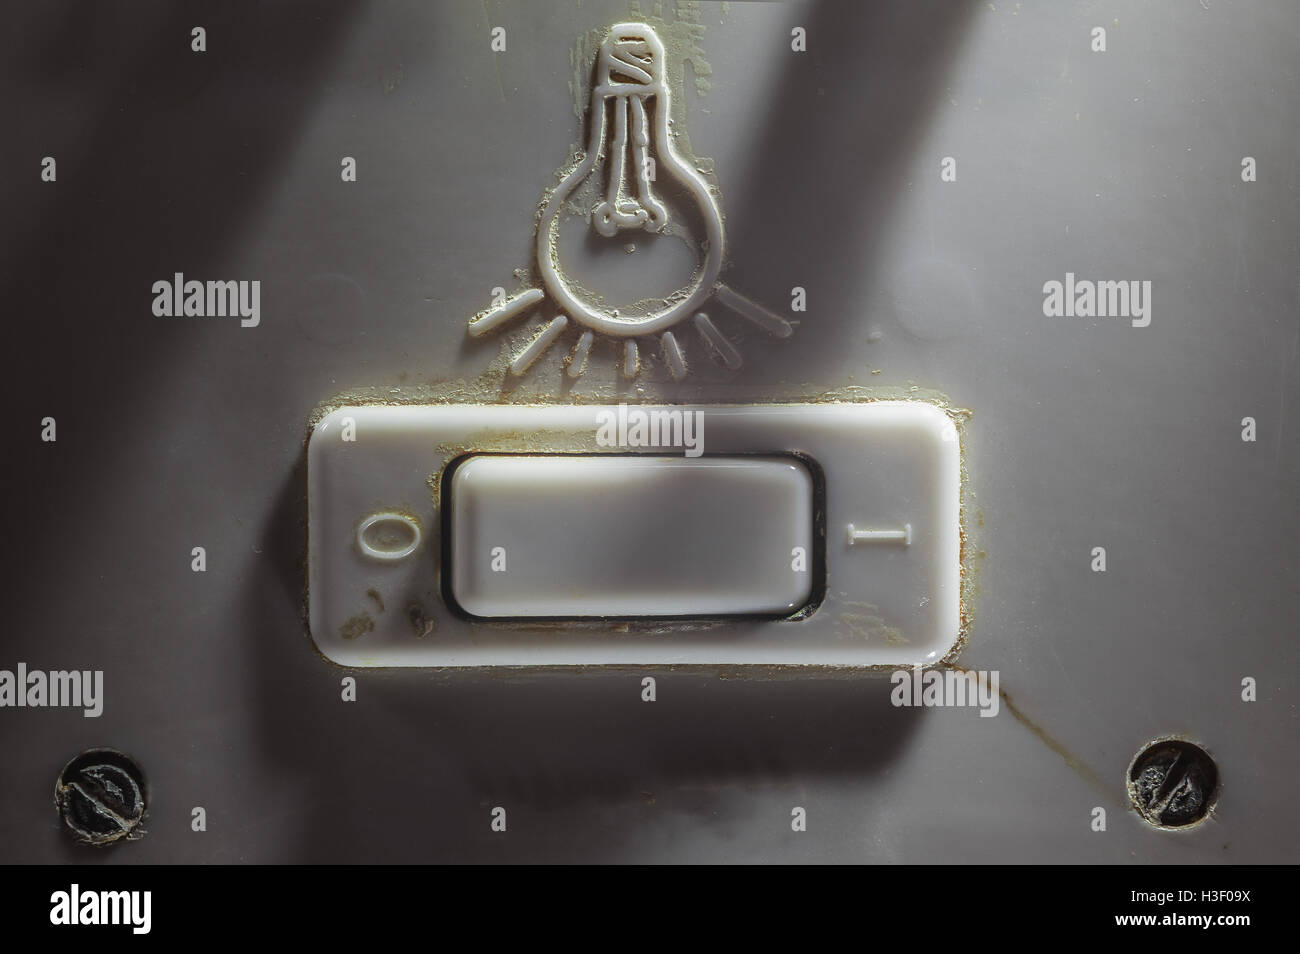 Details of an old dirty plastic switch for turning light on or off. Stock Photo